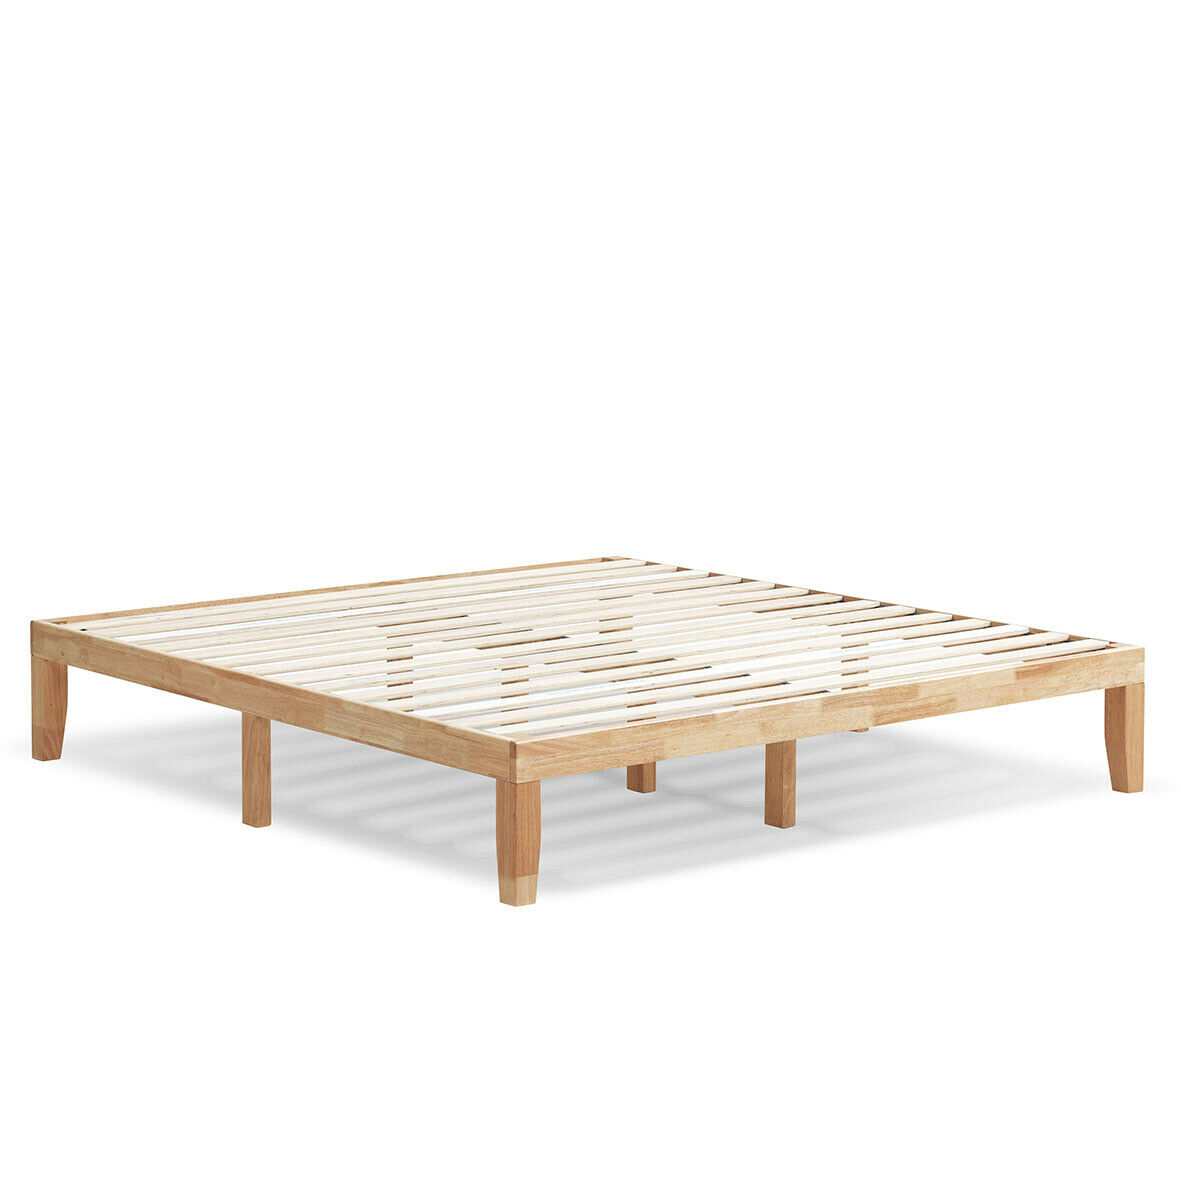 Gymax King Size 14 Wooden Bed Frame, Wooden Slats For King Bed